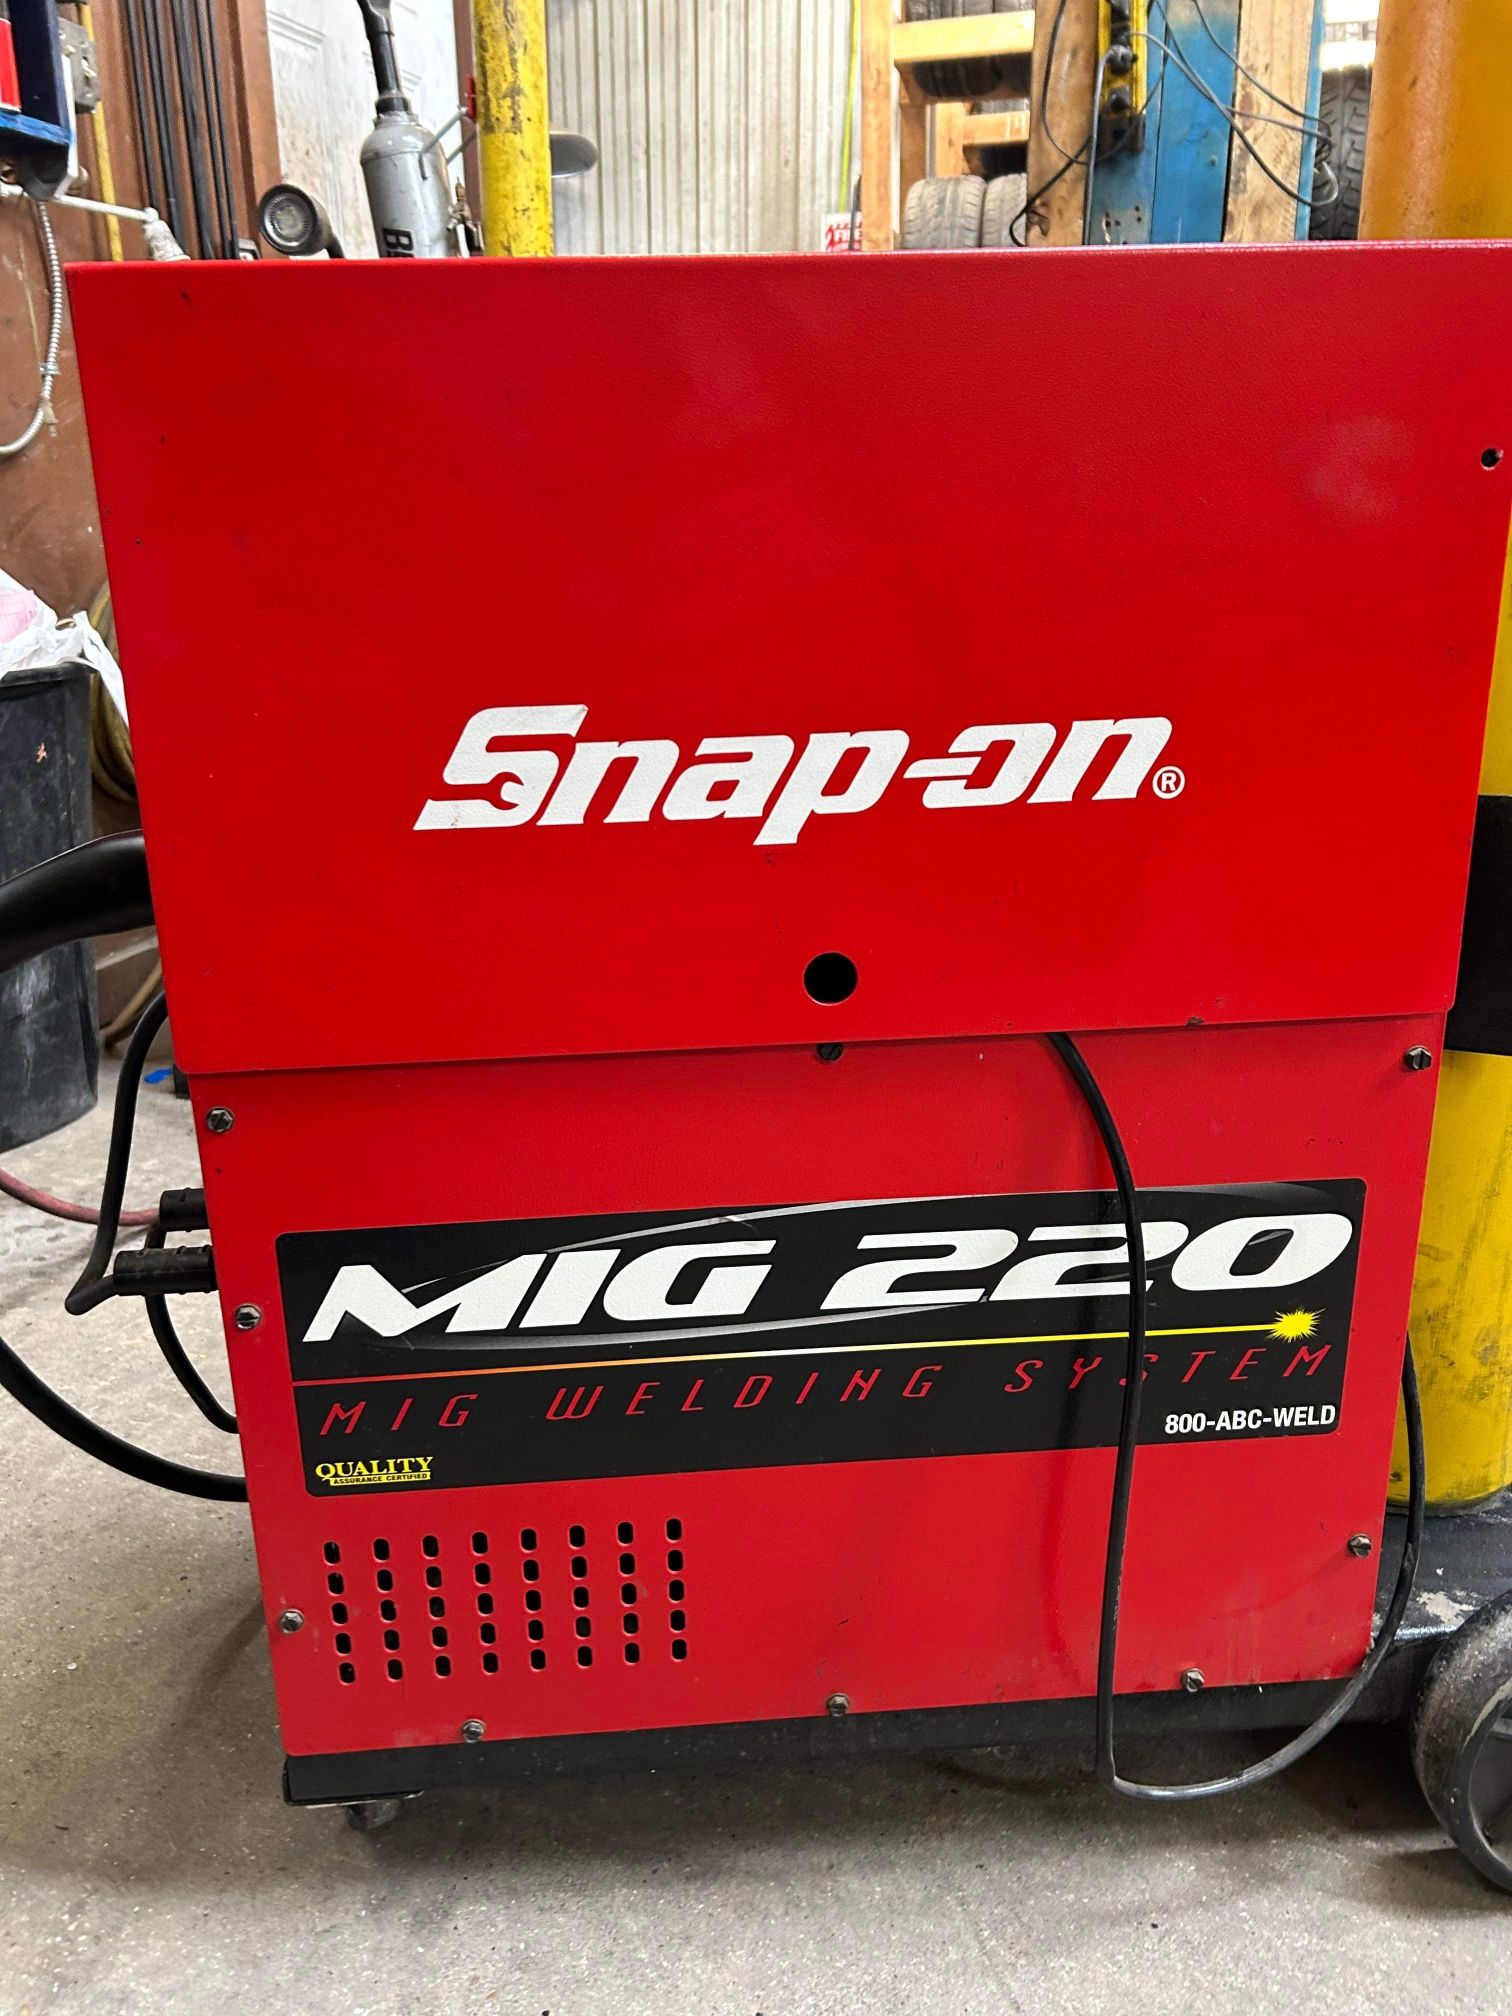 Snap On Mig Welder 220 With Tank And Roll.